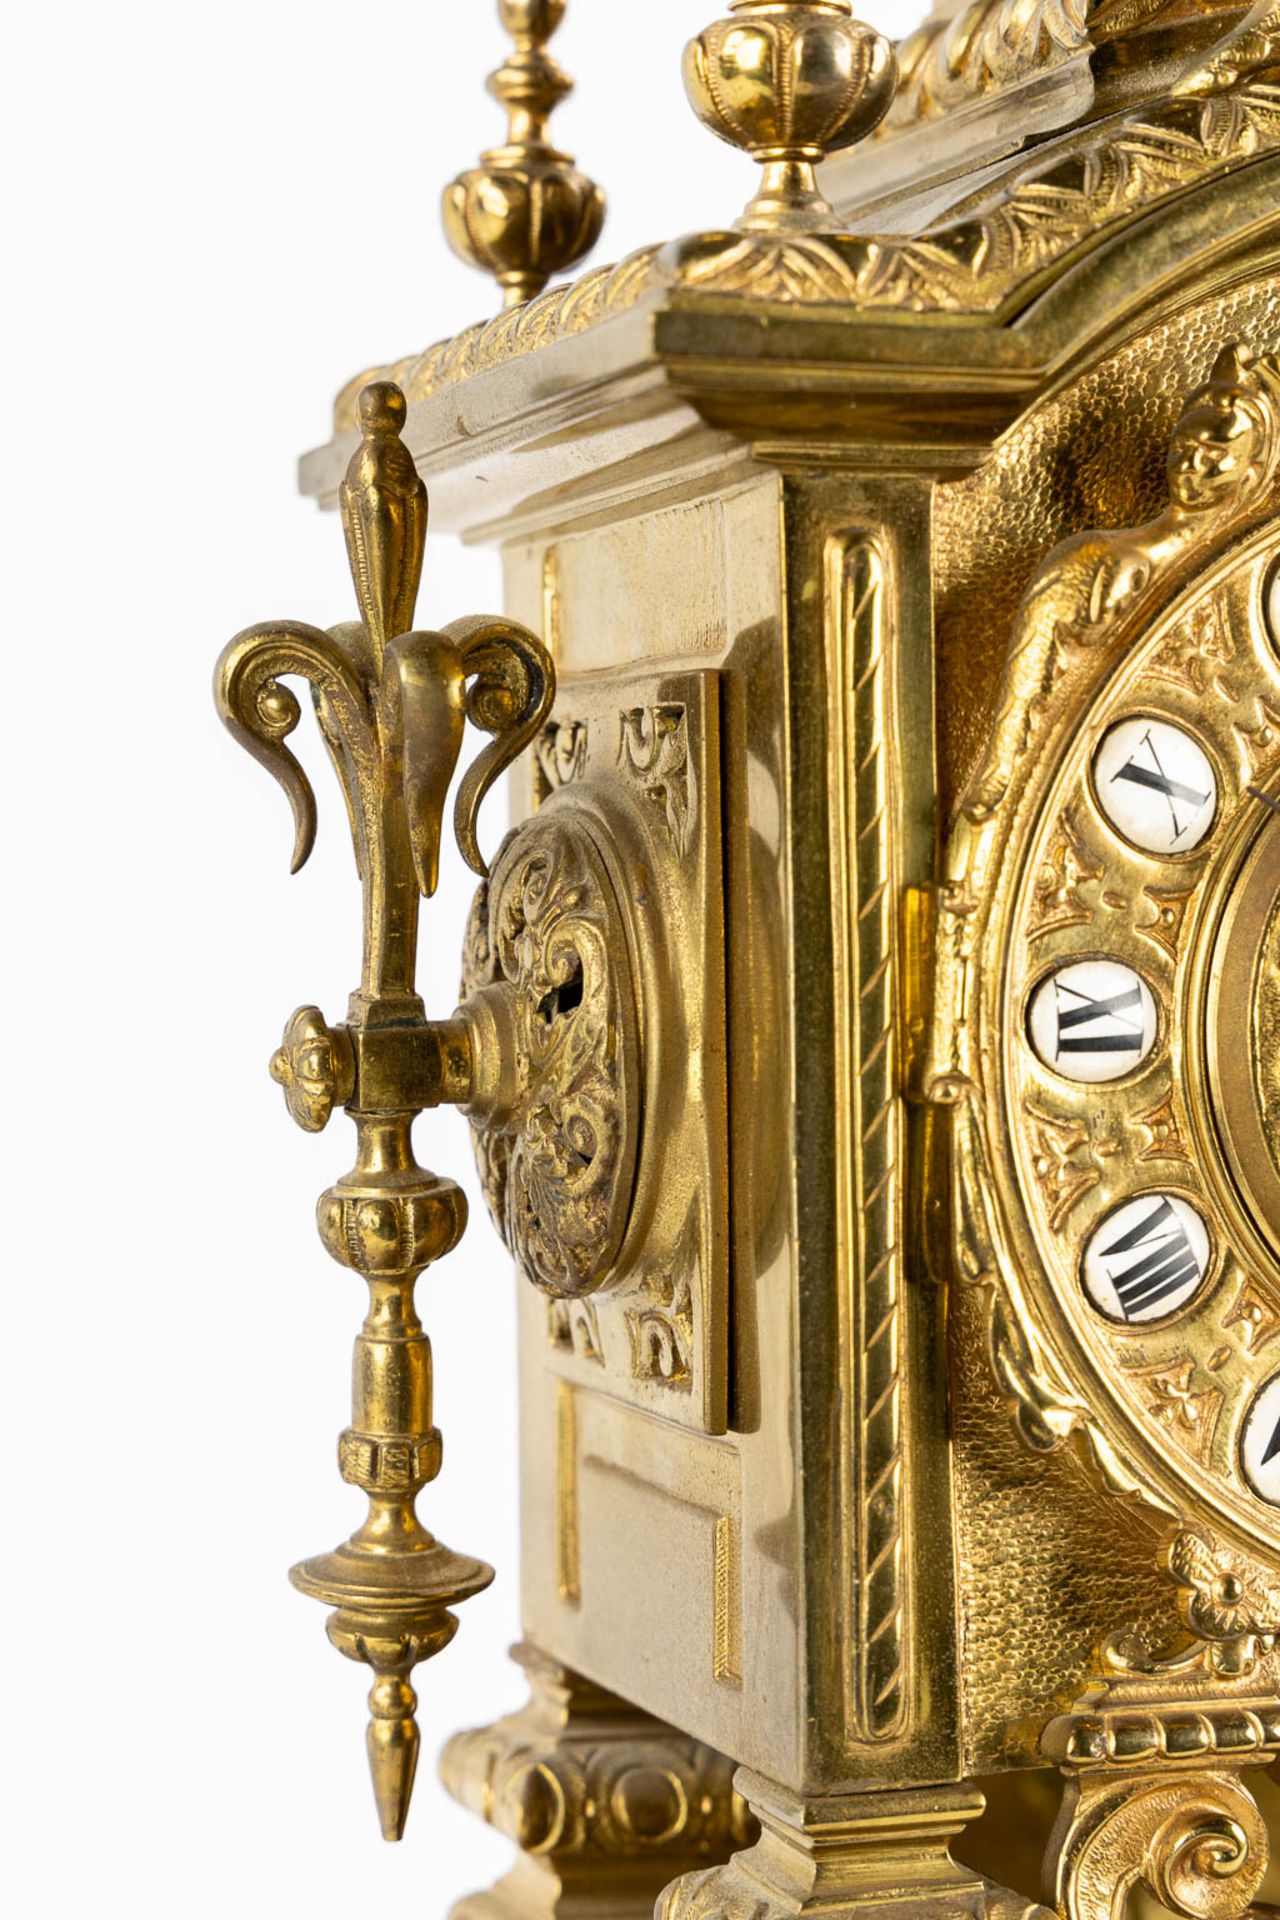 A mantle clock, bronze decorated with angels. Circa 1900. (L:21 x W:27 x H:54 cm) - Image 12 of 13